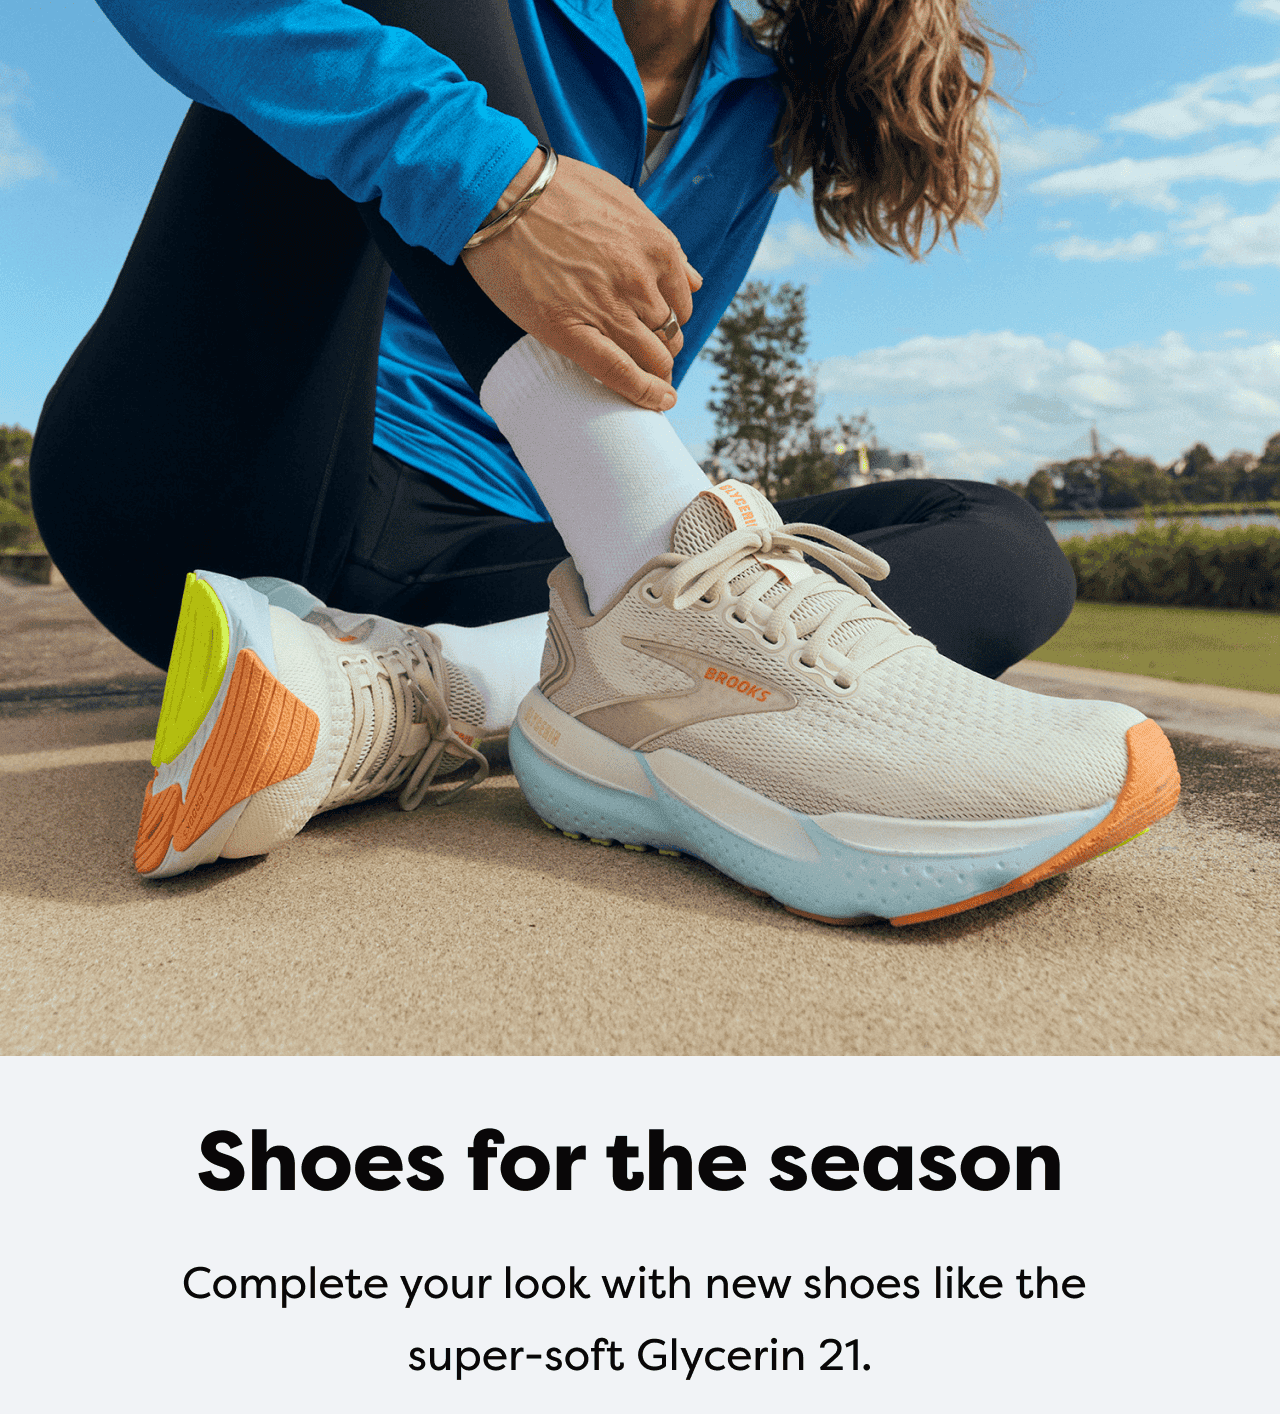 Shoes for the season - Complete your look with new shoes like the super-soft Glycerin 21.